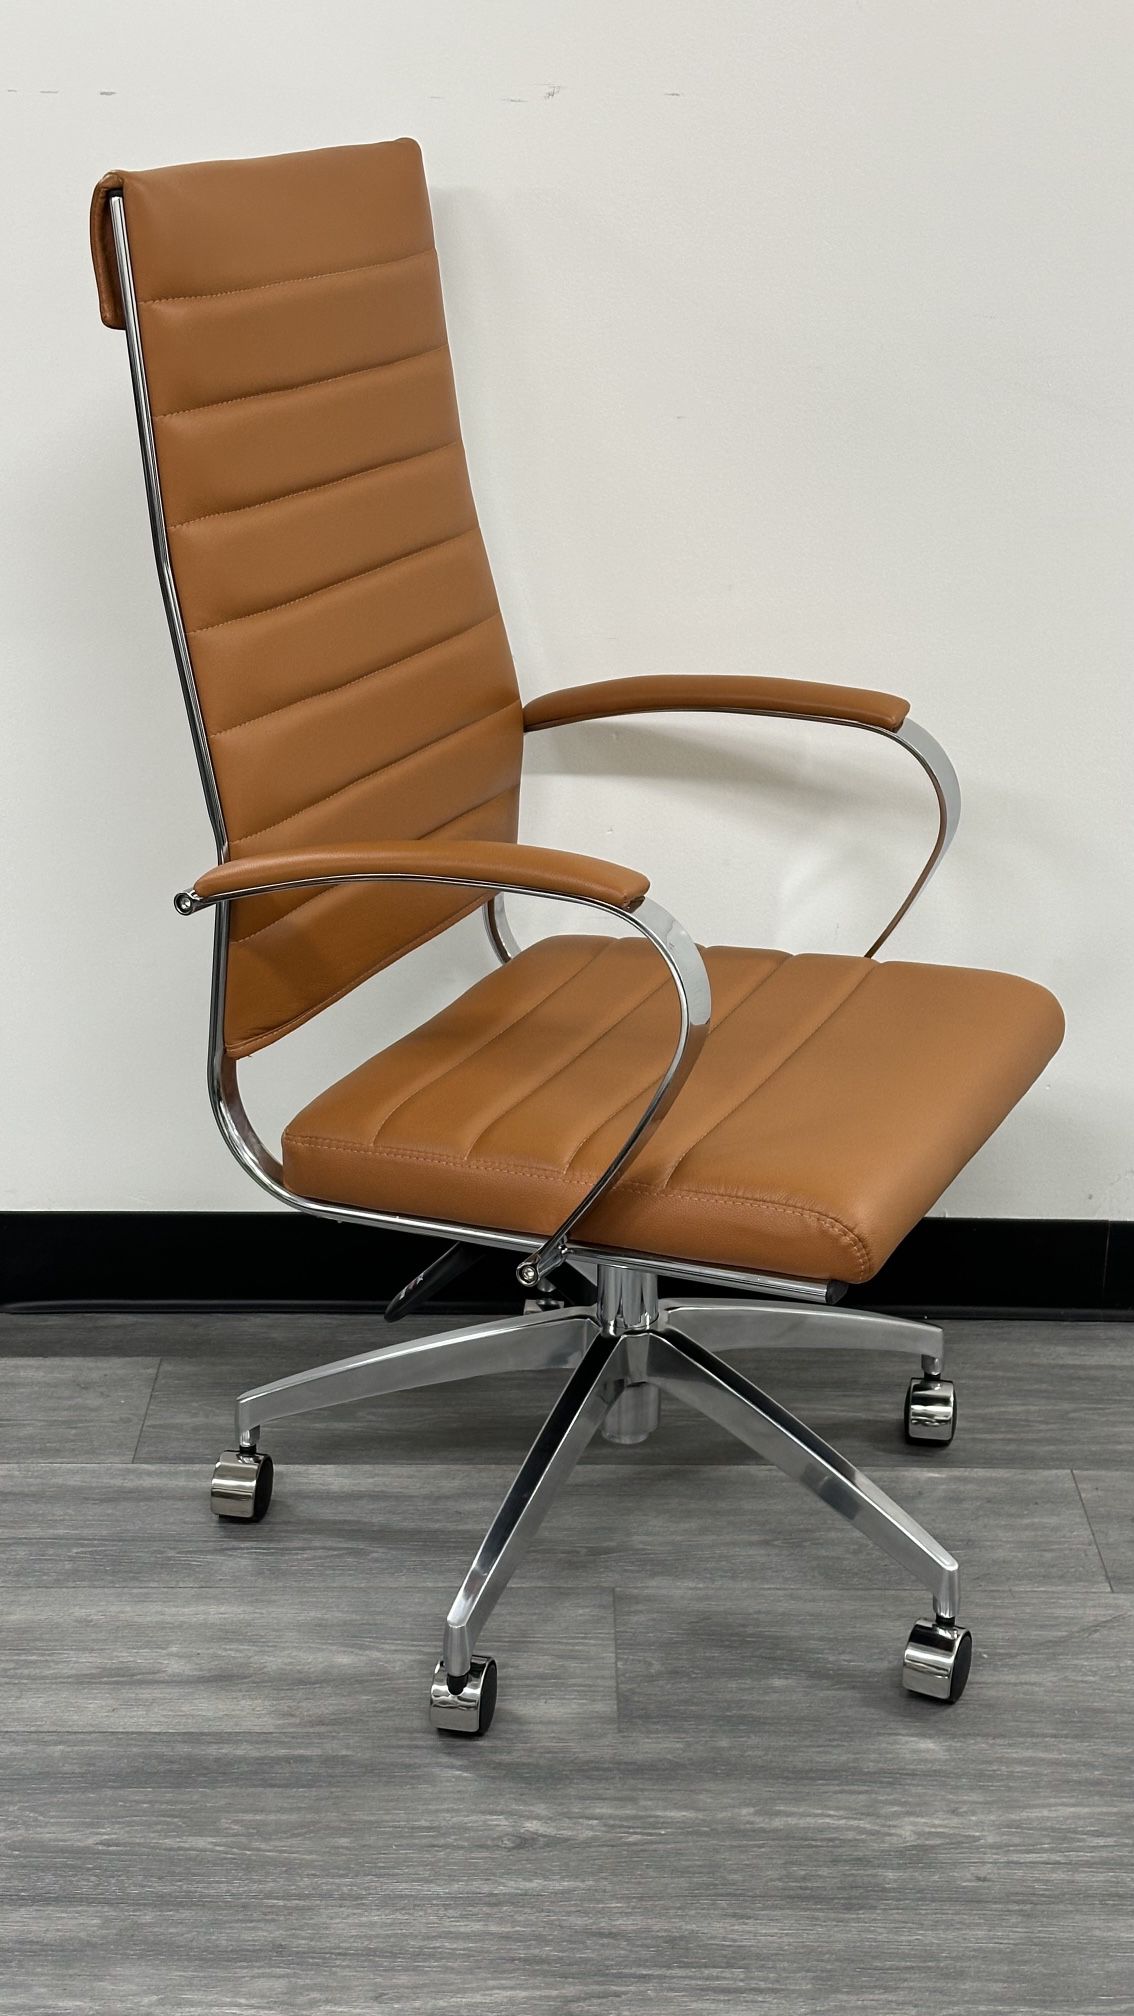 New Tan Leather Office Chair, Management Chair